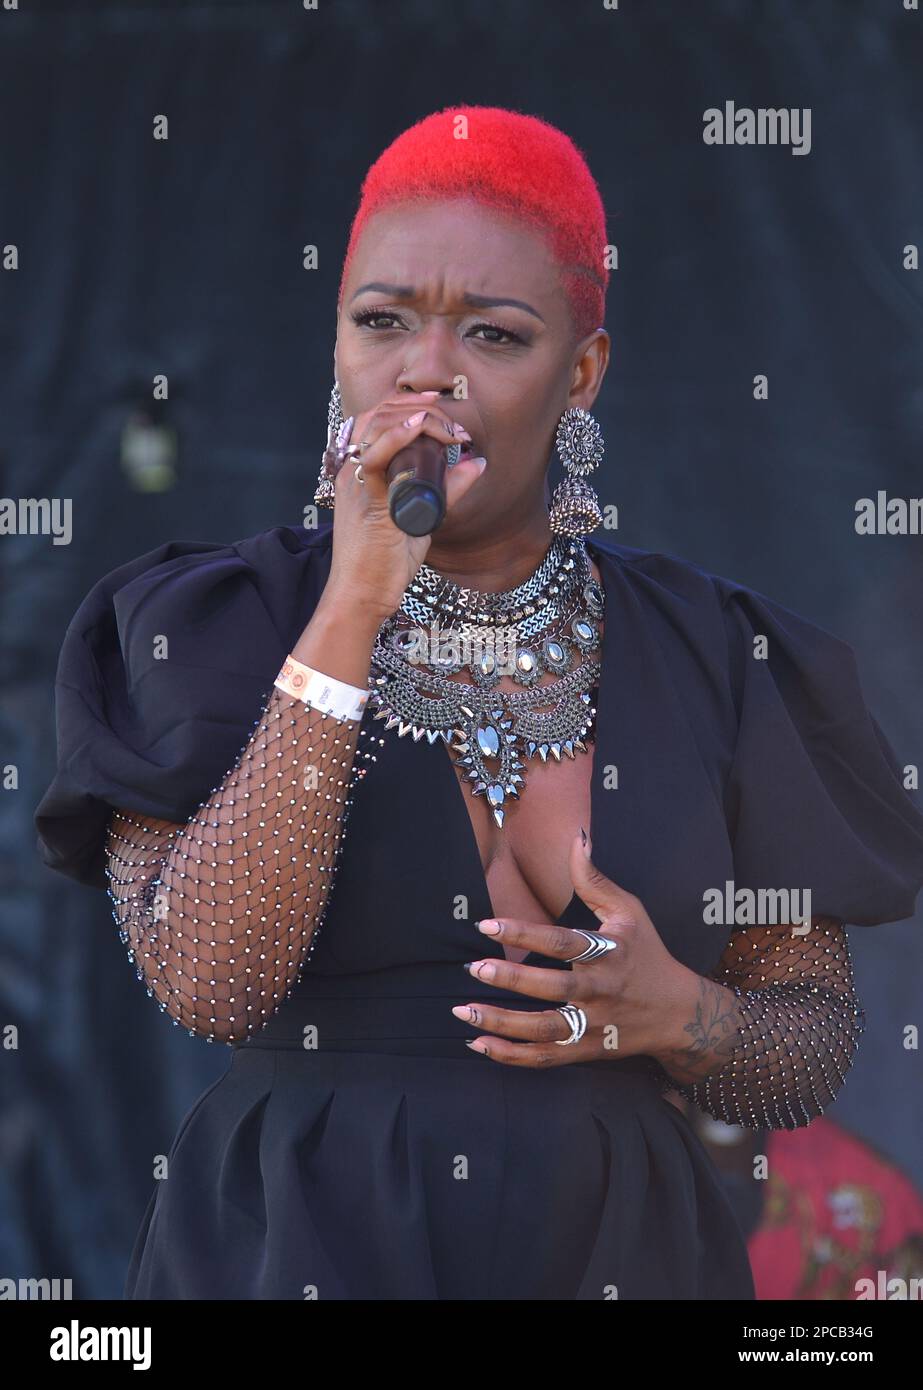 Miami Gardens, USA. 12th Mar, 2023. MIAMI GARDENS, FLORIDA - MARCH 12: LaVie performs live on stage during The 16th Annual Jazz in The Gardens Music Fest (JITG) day2 at Hard Rock Stadium on March 12, 2023 in Miami Gardens, Florida. (Photo by JL/Sipa USA) Credit: Sipa USA/Alamy Live News Stock Photo